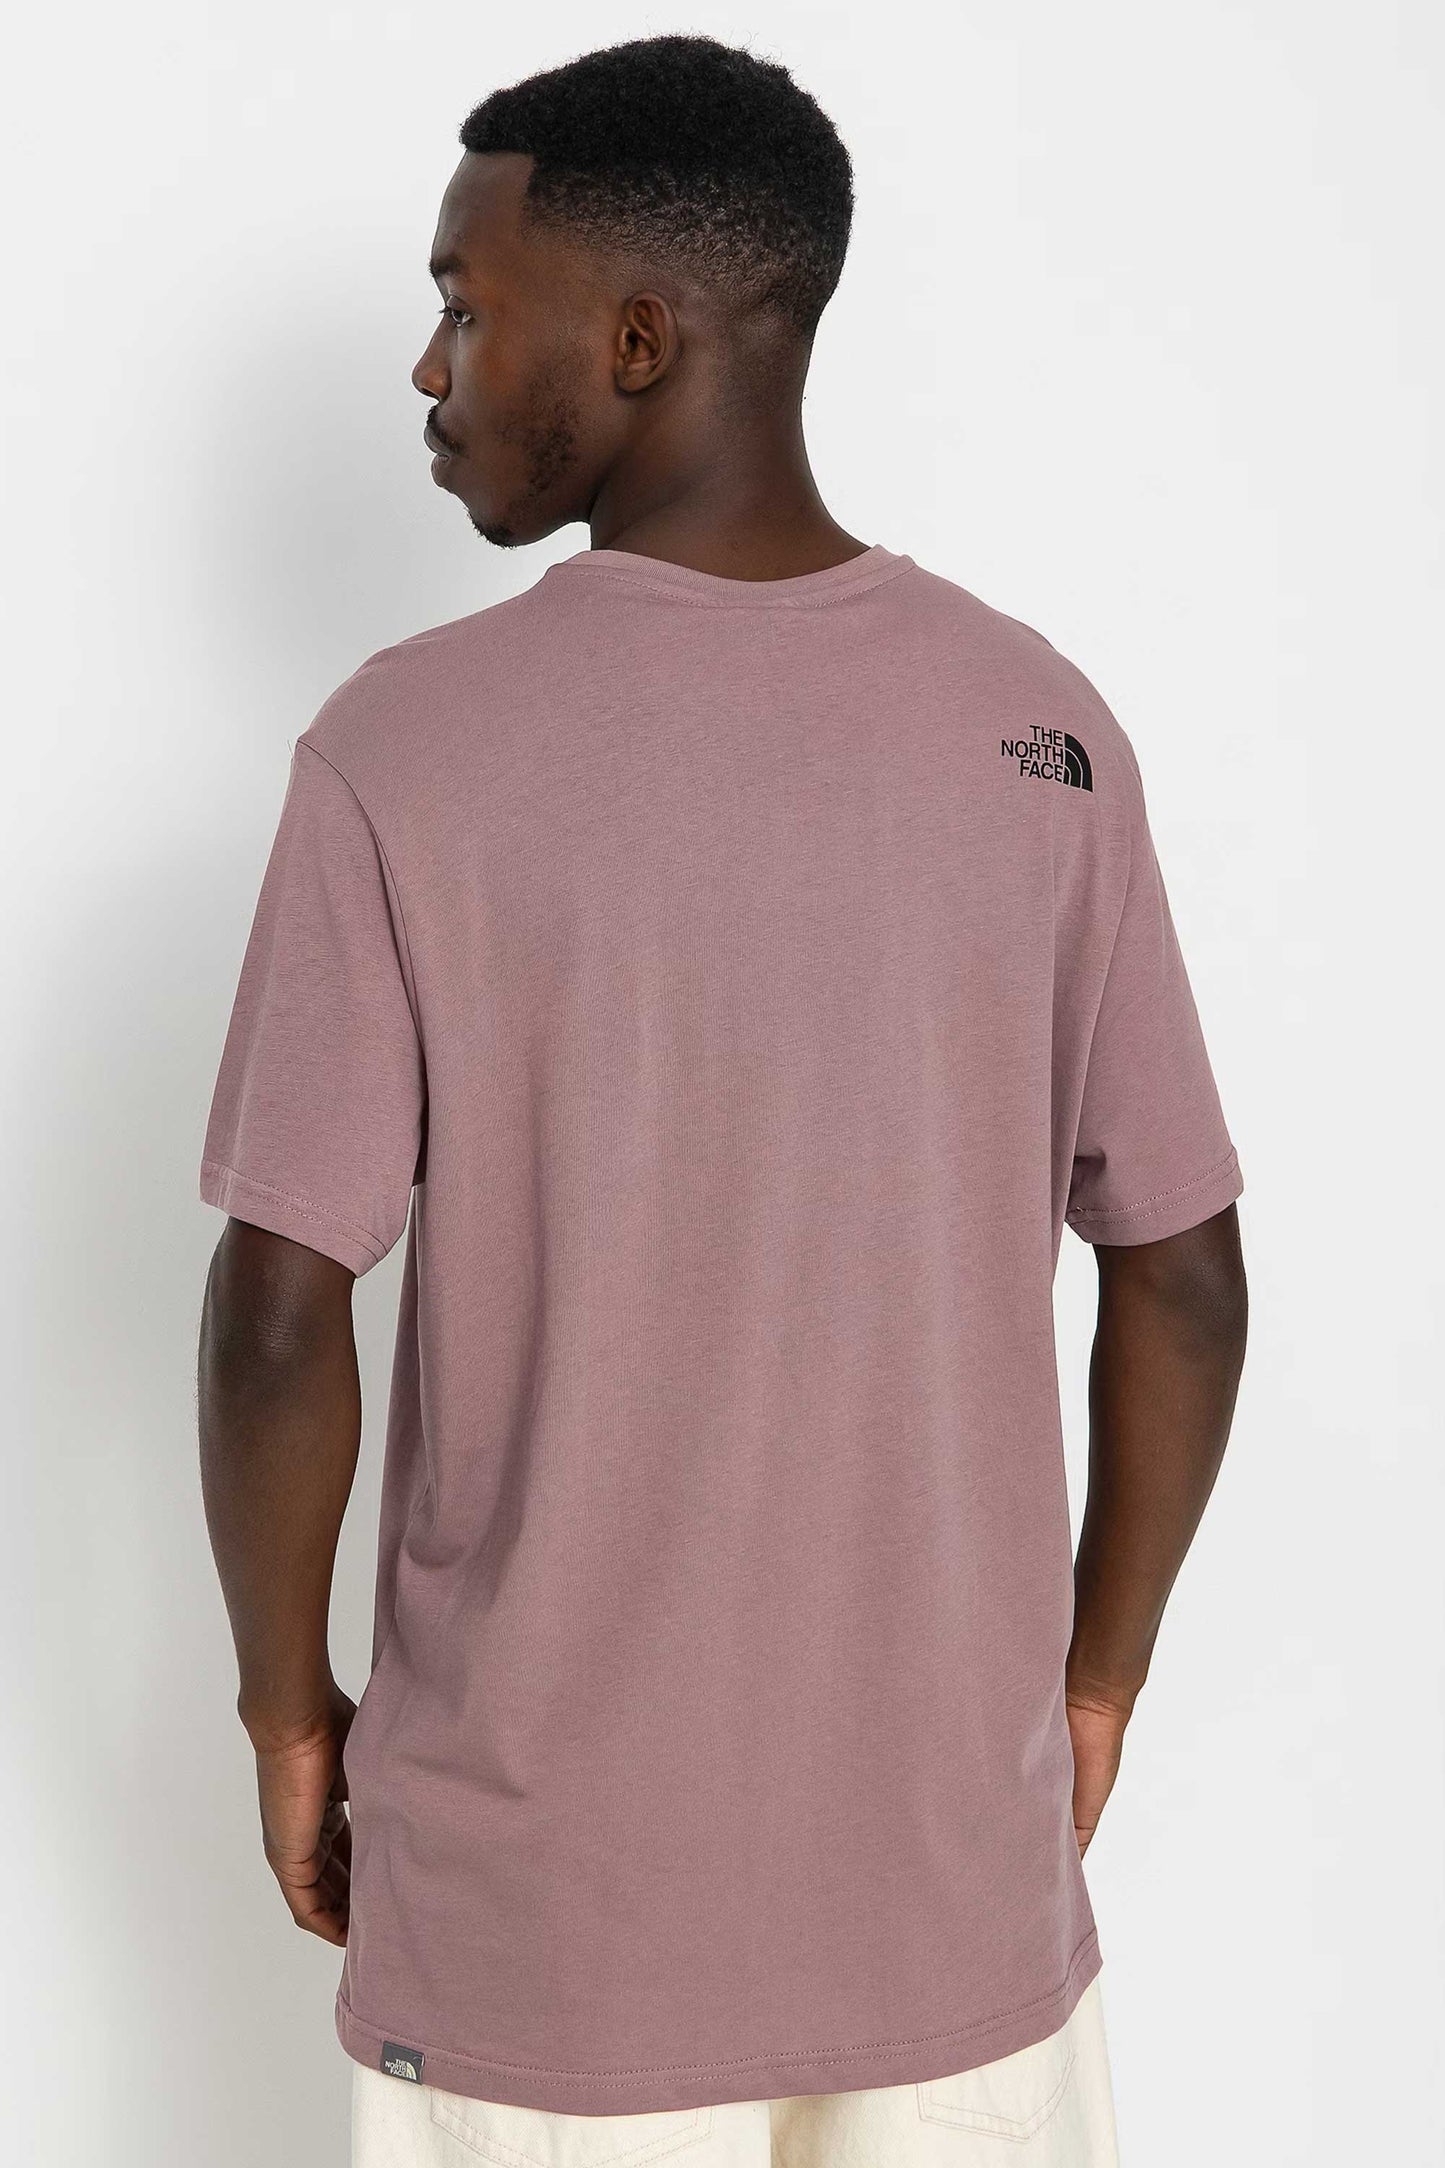 Pukas-Surf-Shop-The-north-face-simple-dome-tee-fawn-grey